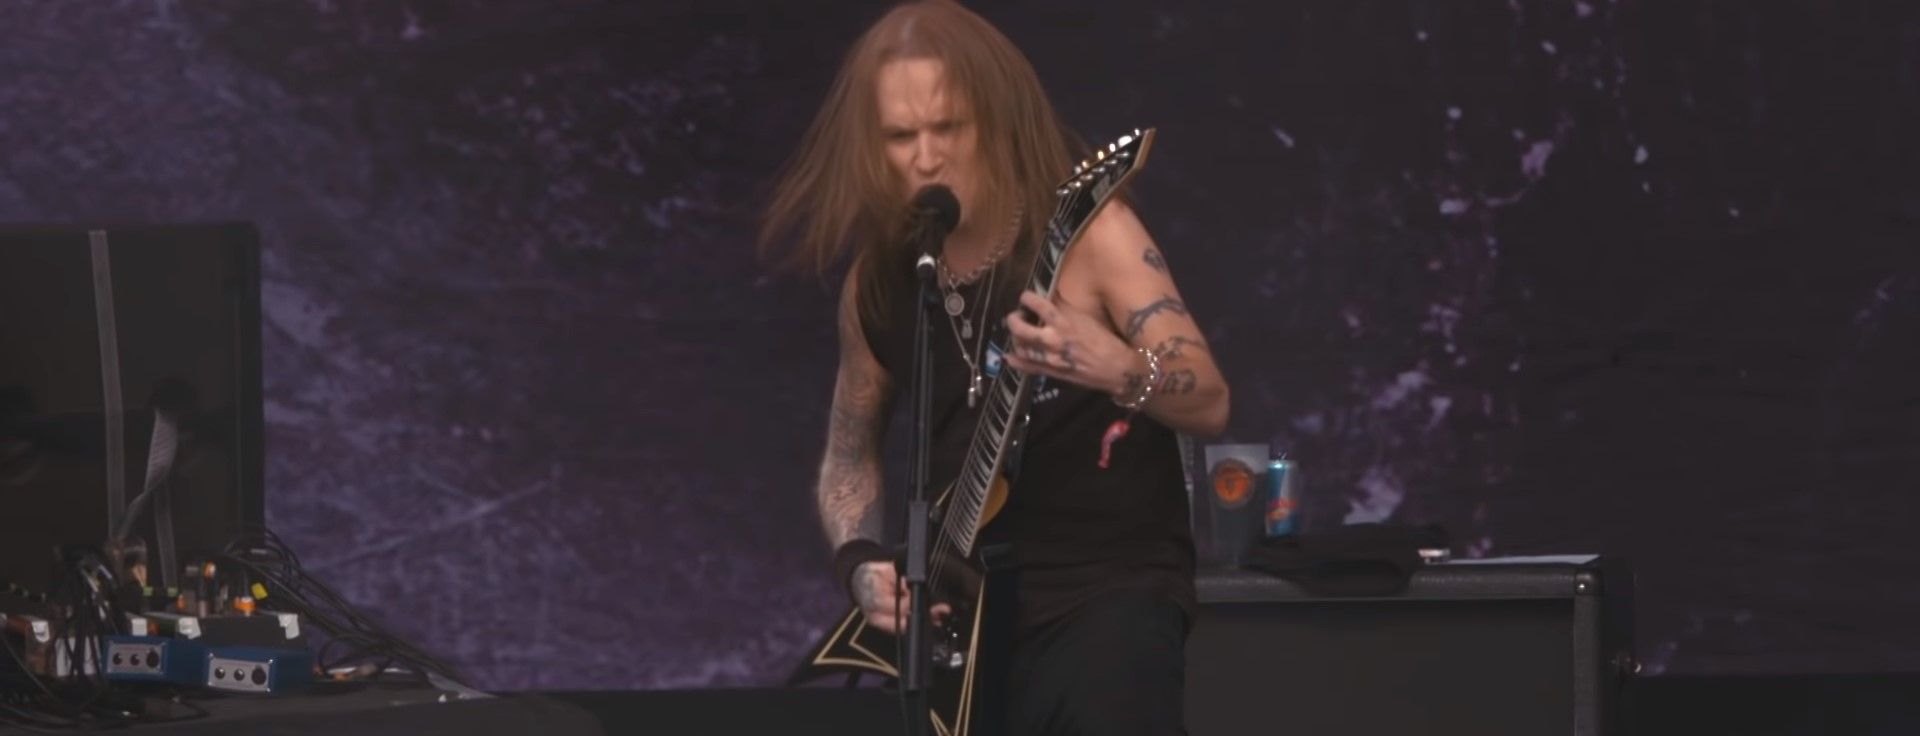 Children Of Bodom - In Your Face (Live At Bloodstock 2019)